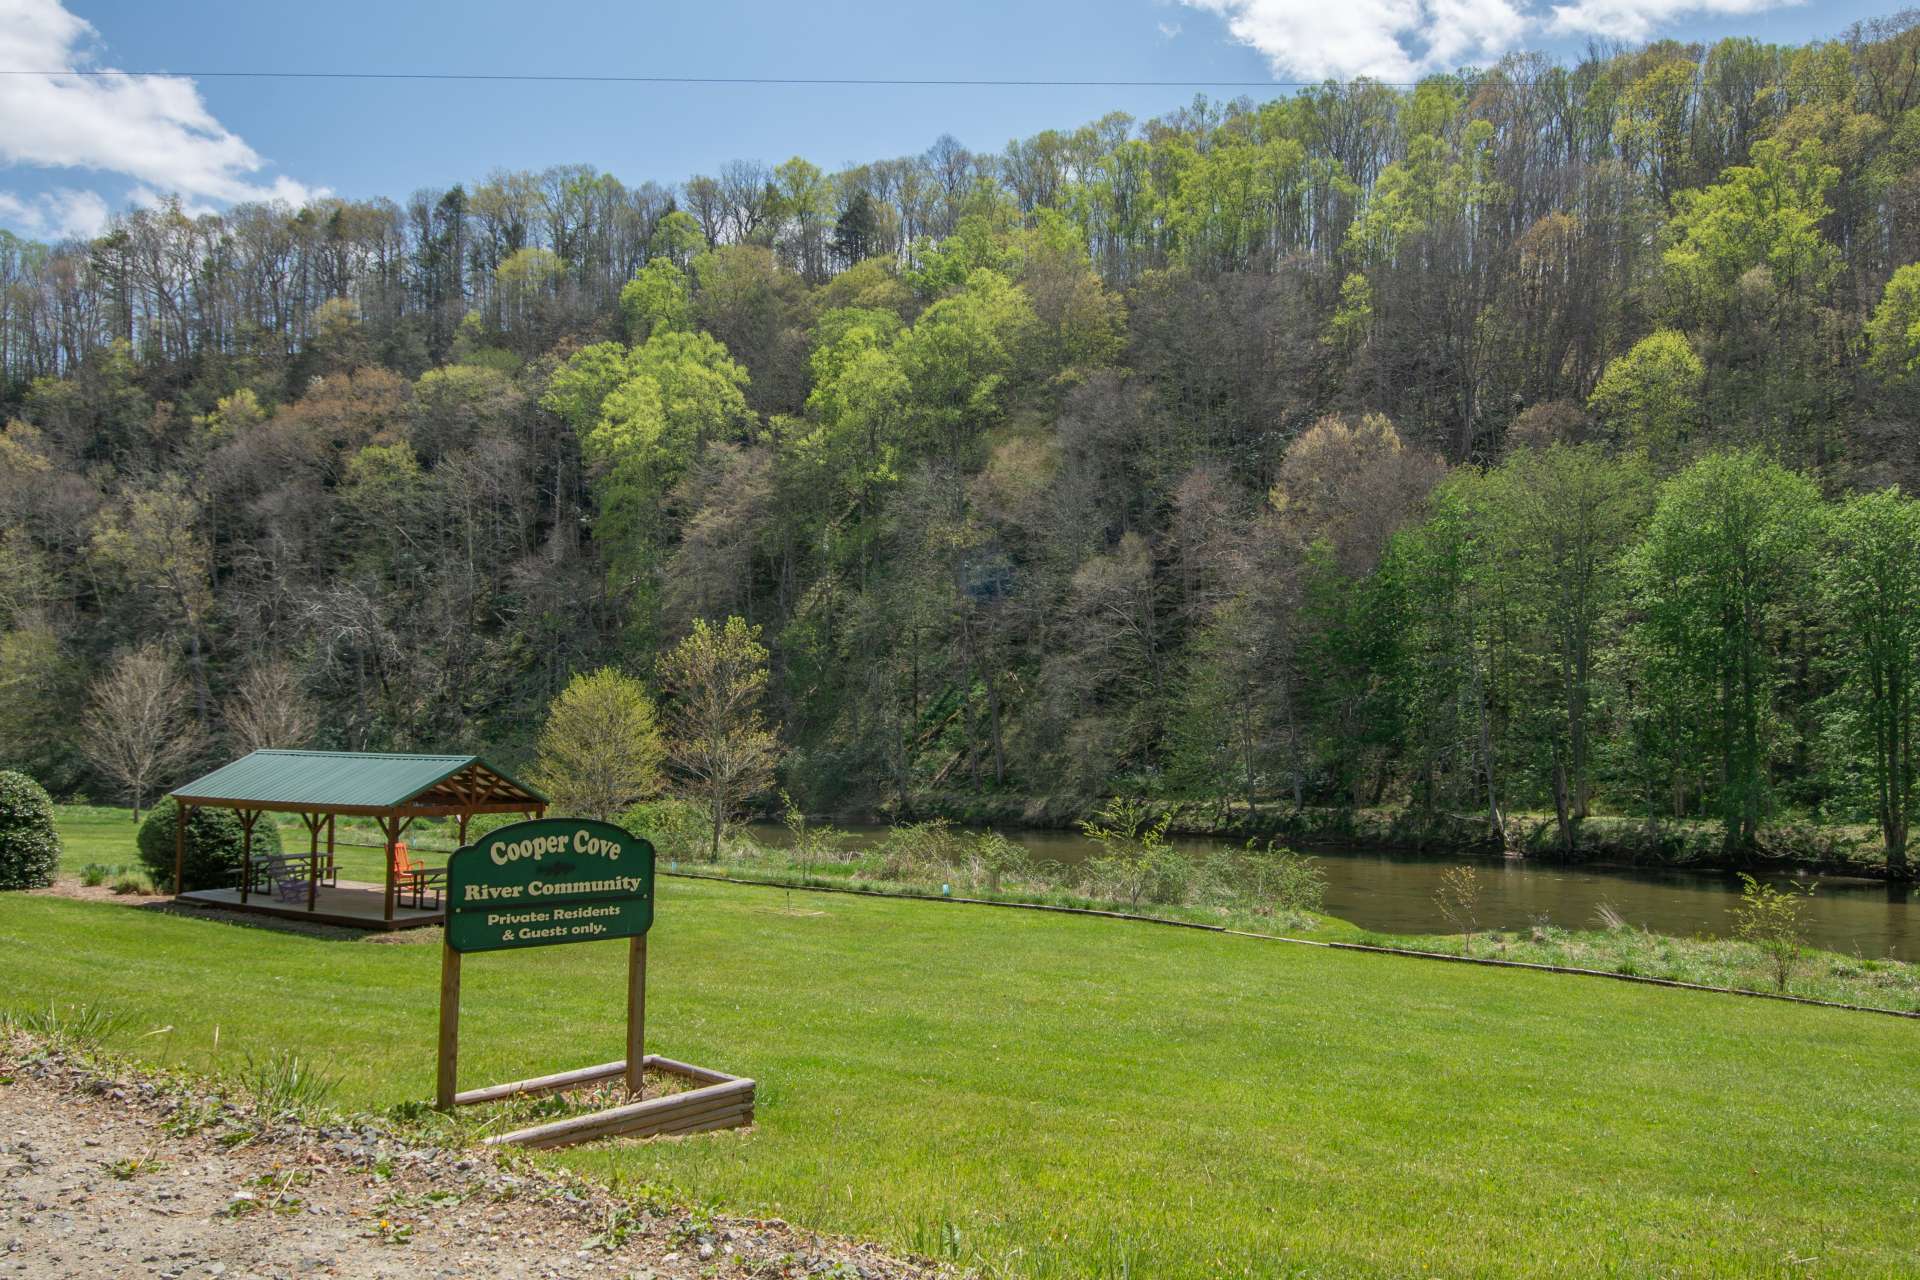 Residents of Cooper Cove are privileged with a common area offering a picnic area and easy access to the river for fishing, kayaking, tubing, or simply relaxing by the banks of the river.